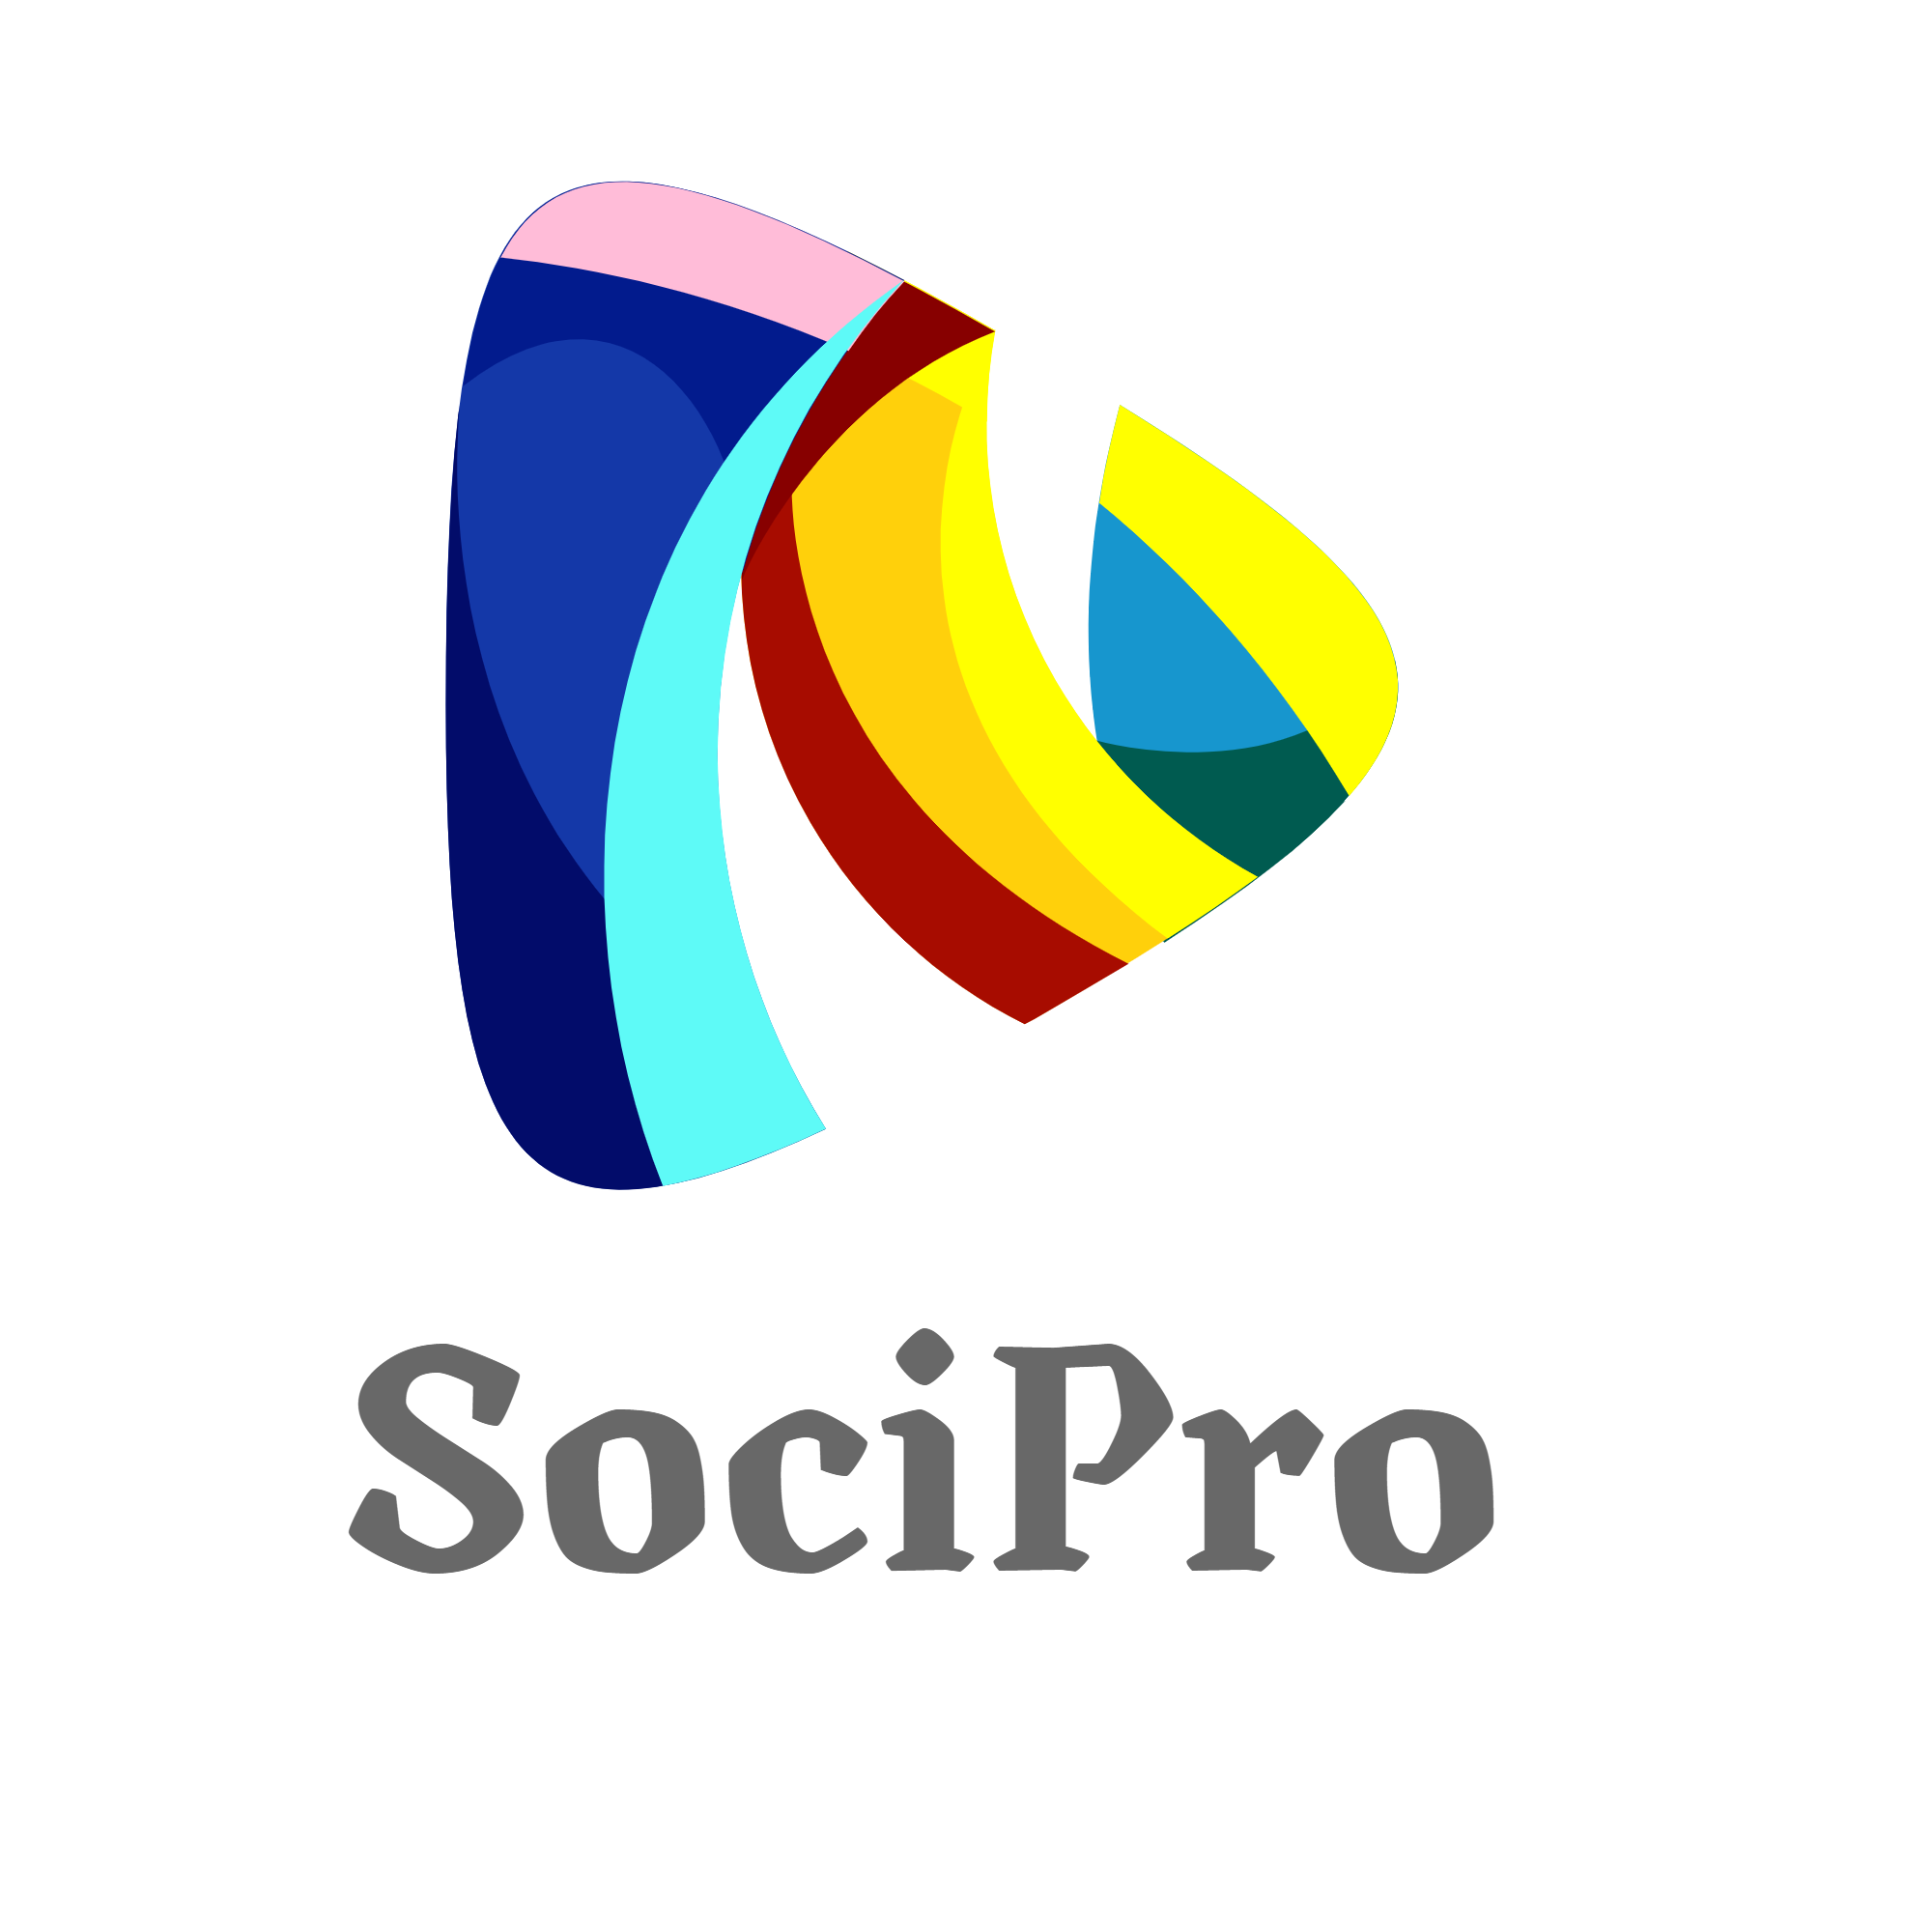 Access to social media promotion and video creation software.